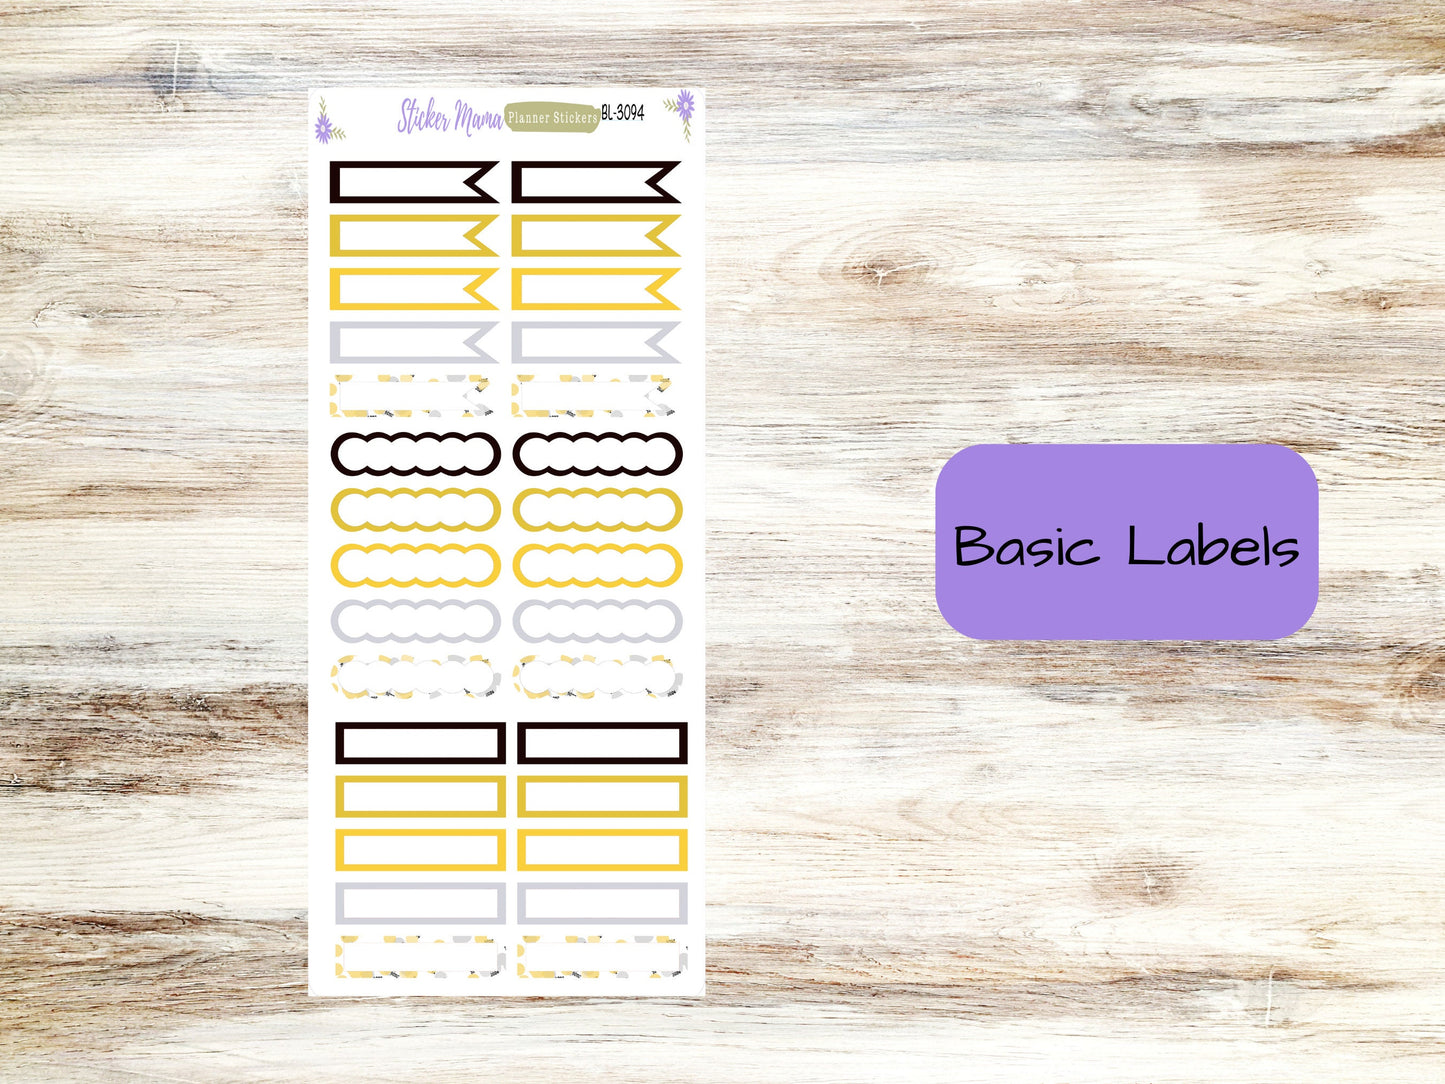 BL-3094 - HB-3094 HAPPY New Year Basic Label Stickers -  - Half Boxes - Planner Stickers - Full Box for Planners